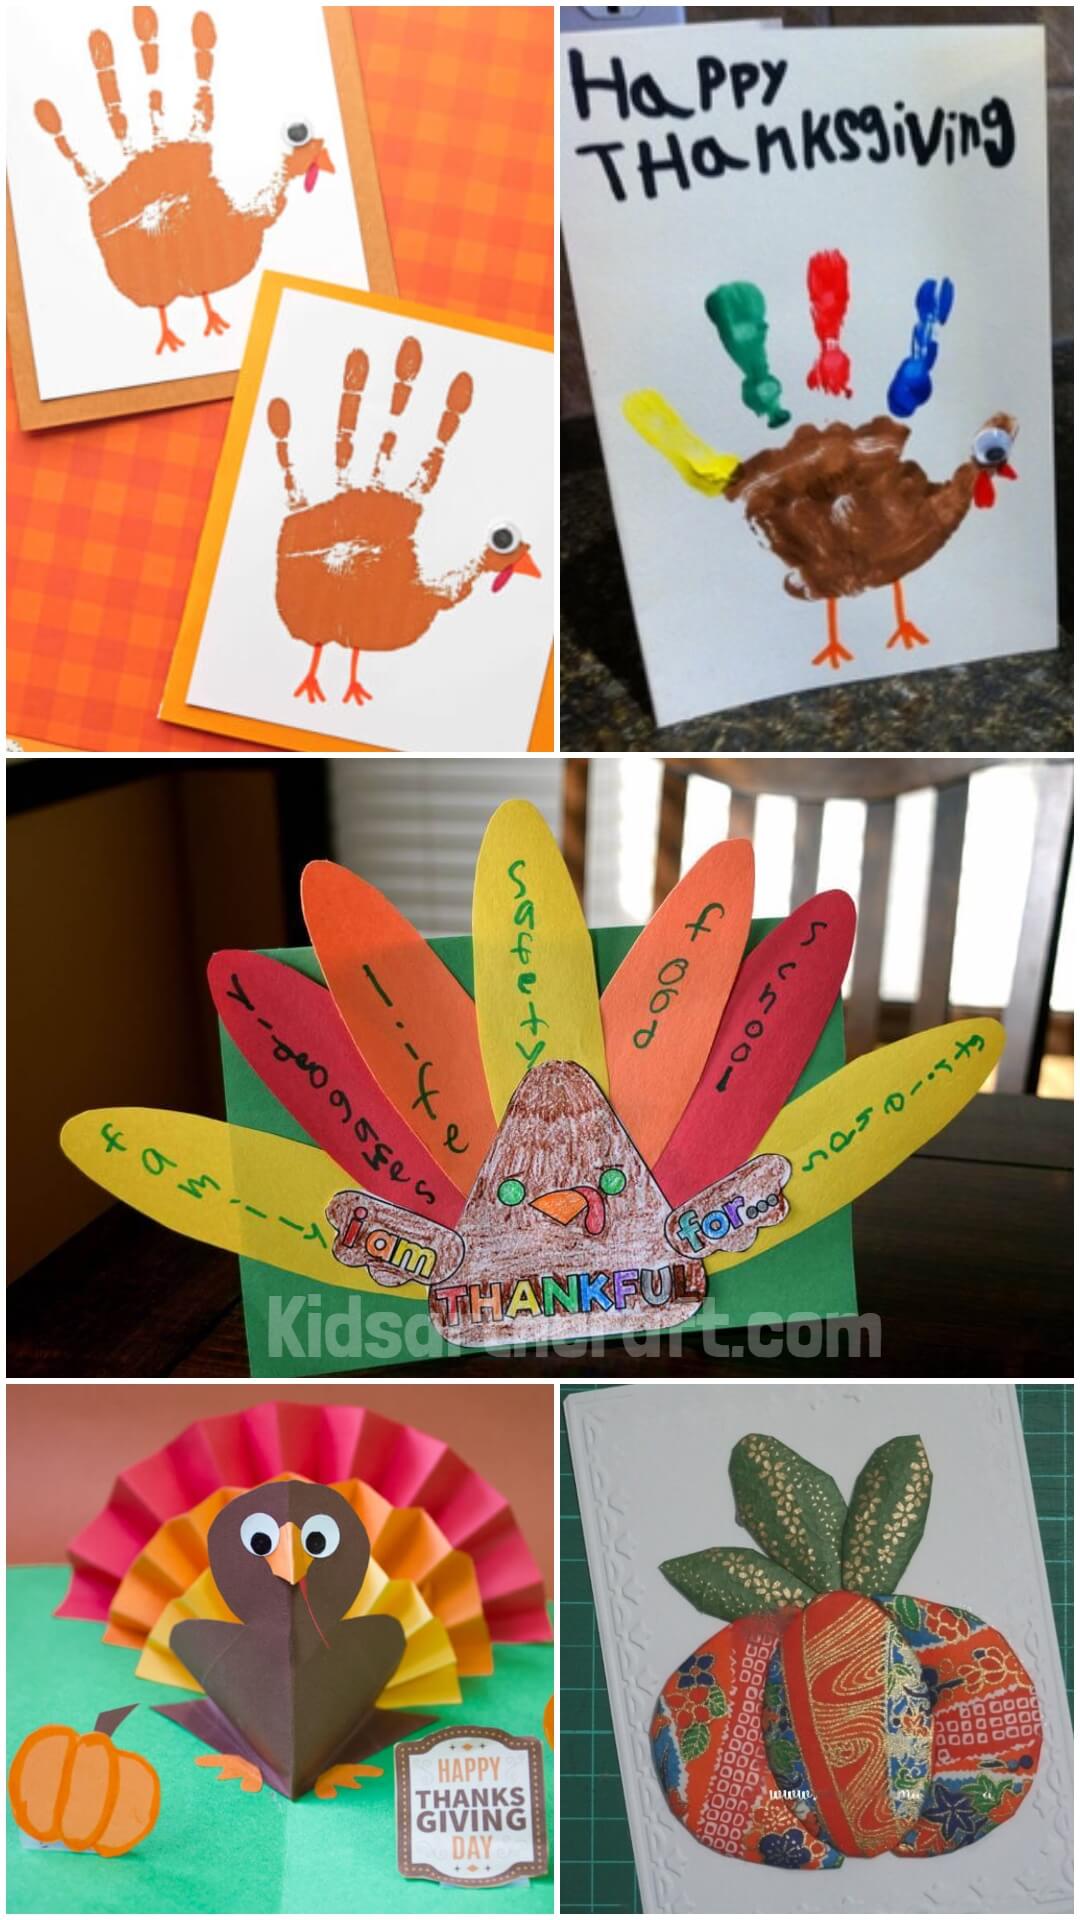 DIY Paper Card Ideas for Thanksgiving